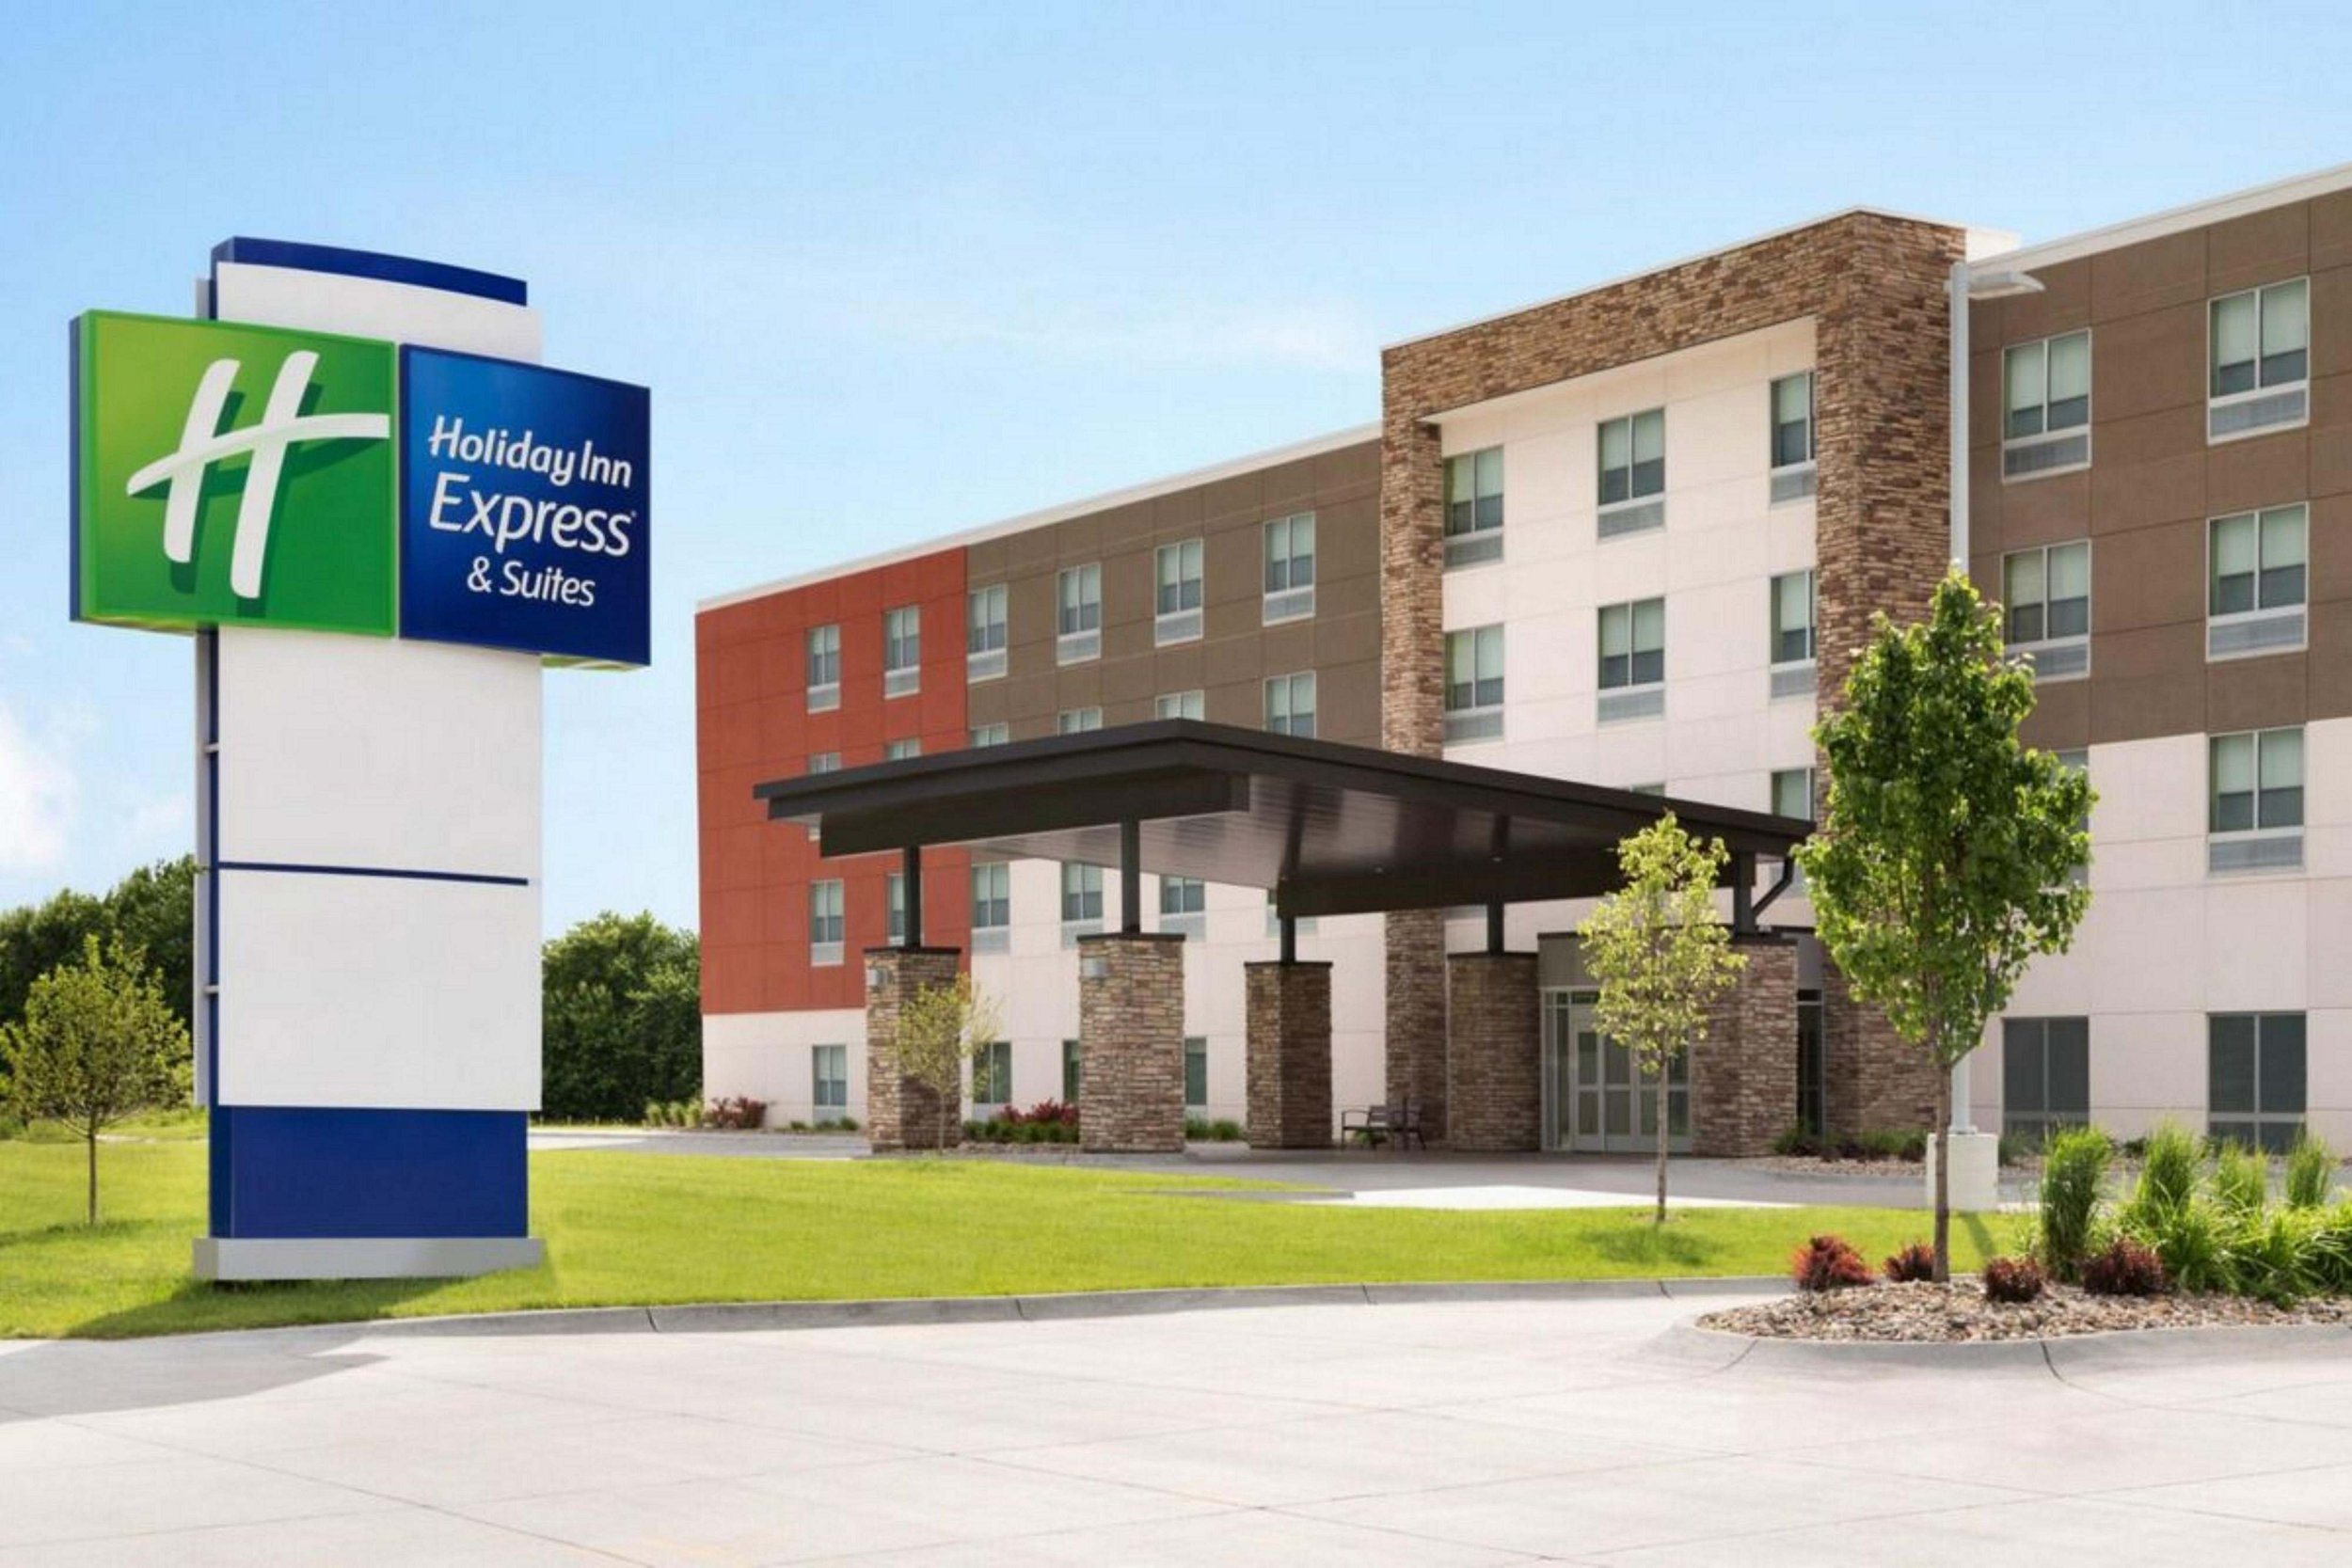 Holiday Inn Express &amp; Suites - Dearborn,MI